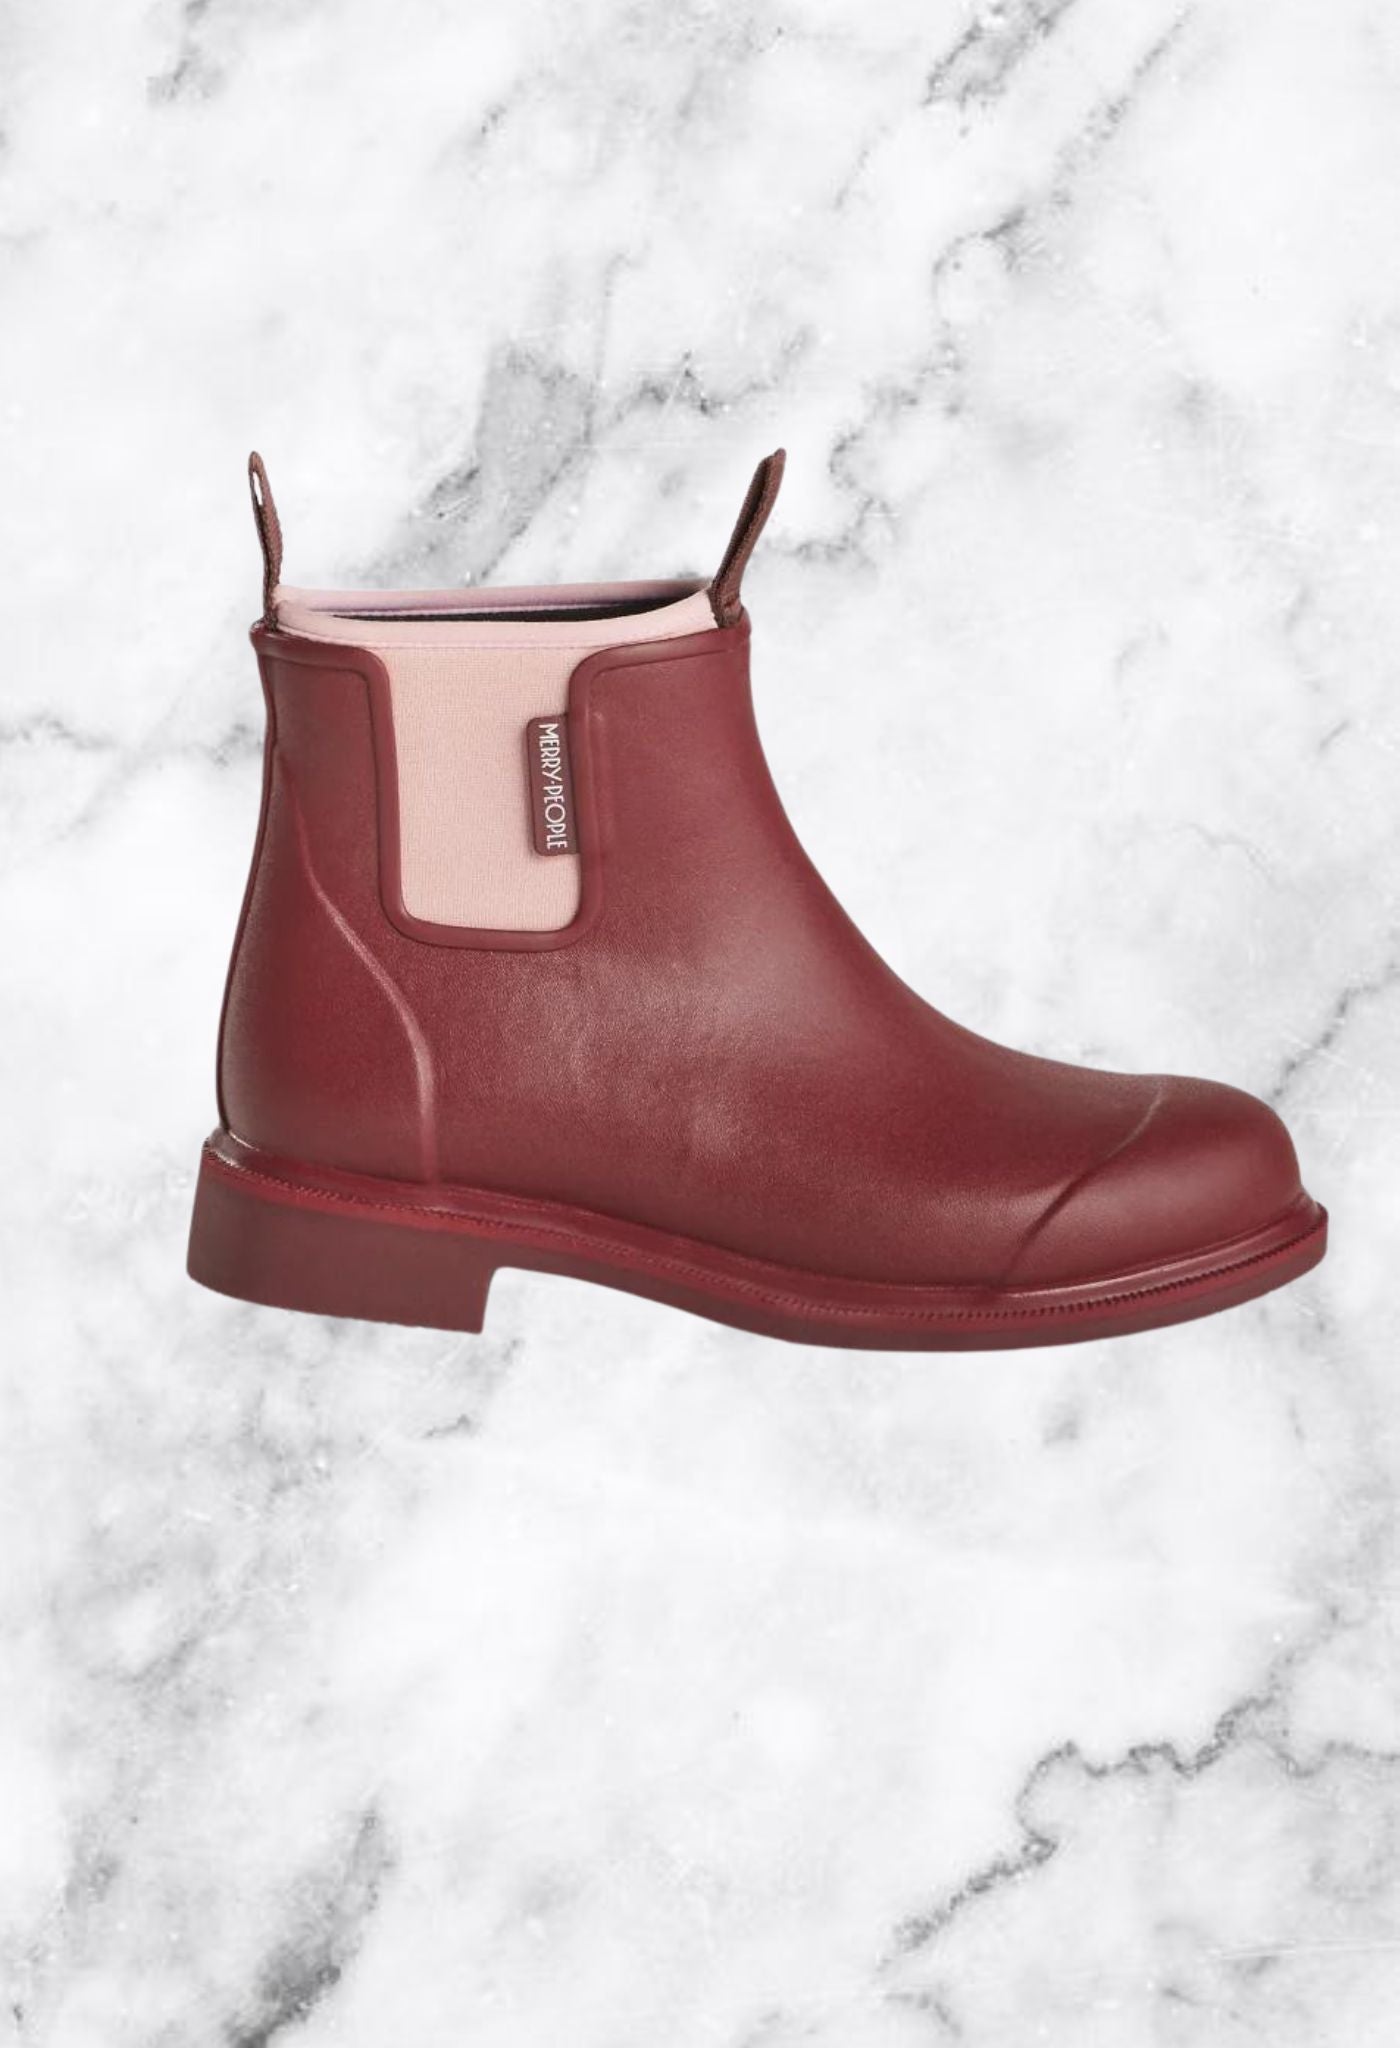 Merry People Bobbi Boots Beetroot & Pink